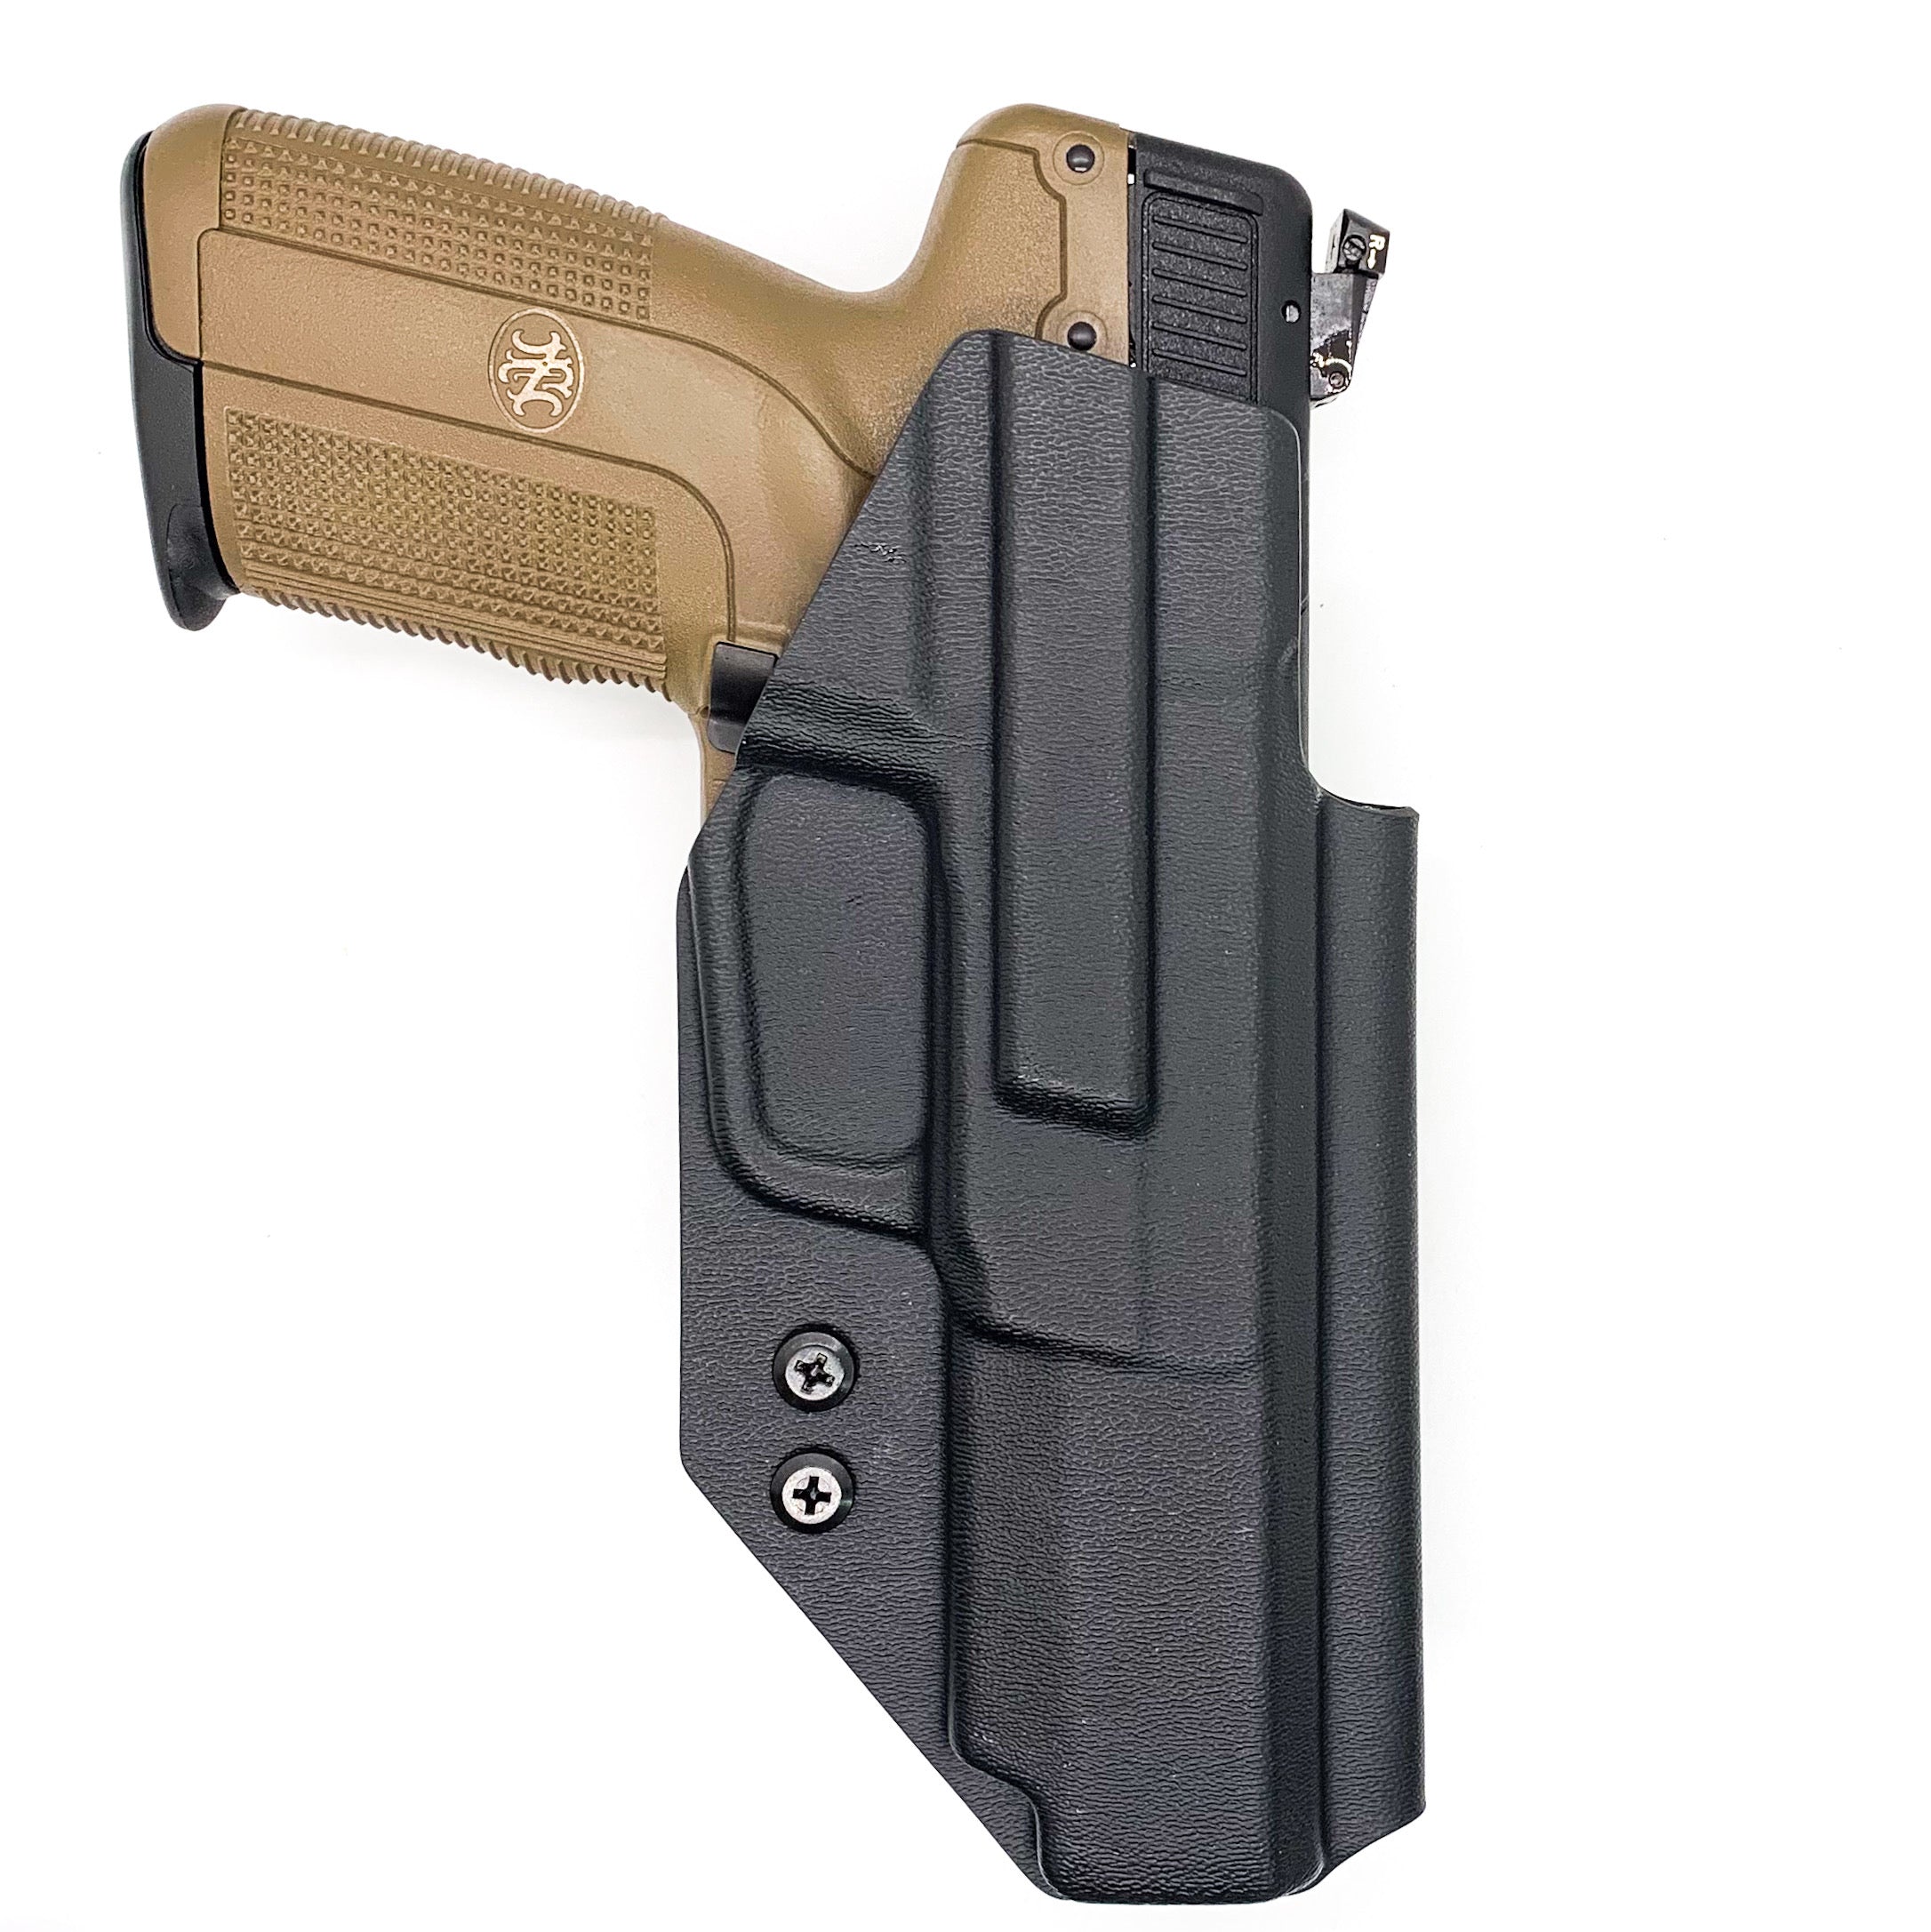 For the BEST Outside Waistband taco style holster designed to fit the FN America Five-seveN  pistol, shop Four Brothers Holsters.  Featuring adjustable retention and cant, and smooth edges for reduced printing this holster is formed from .080" thermoplastic for durability and comfort  Proudly Made in the USA 57 5.7